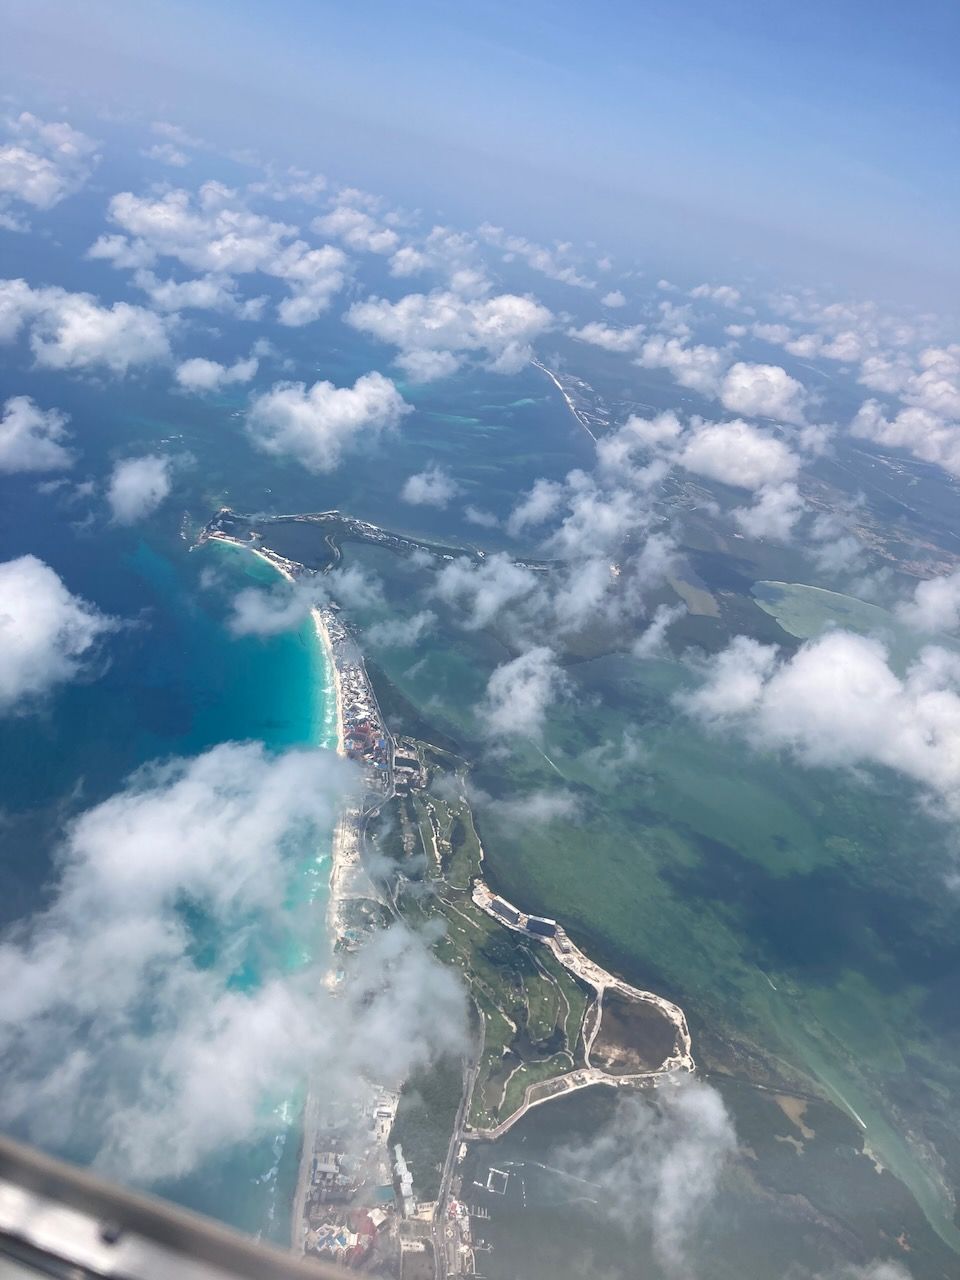 Cancun from the airplane window